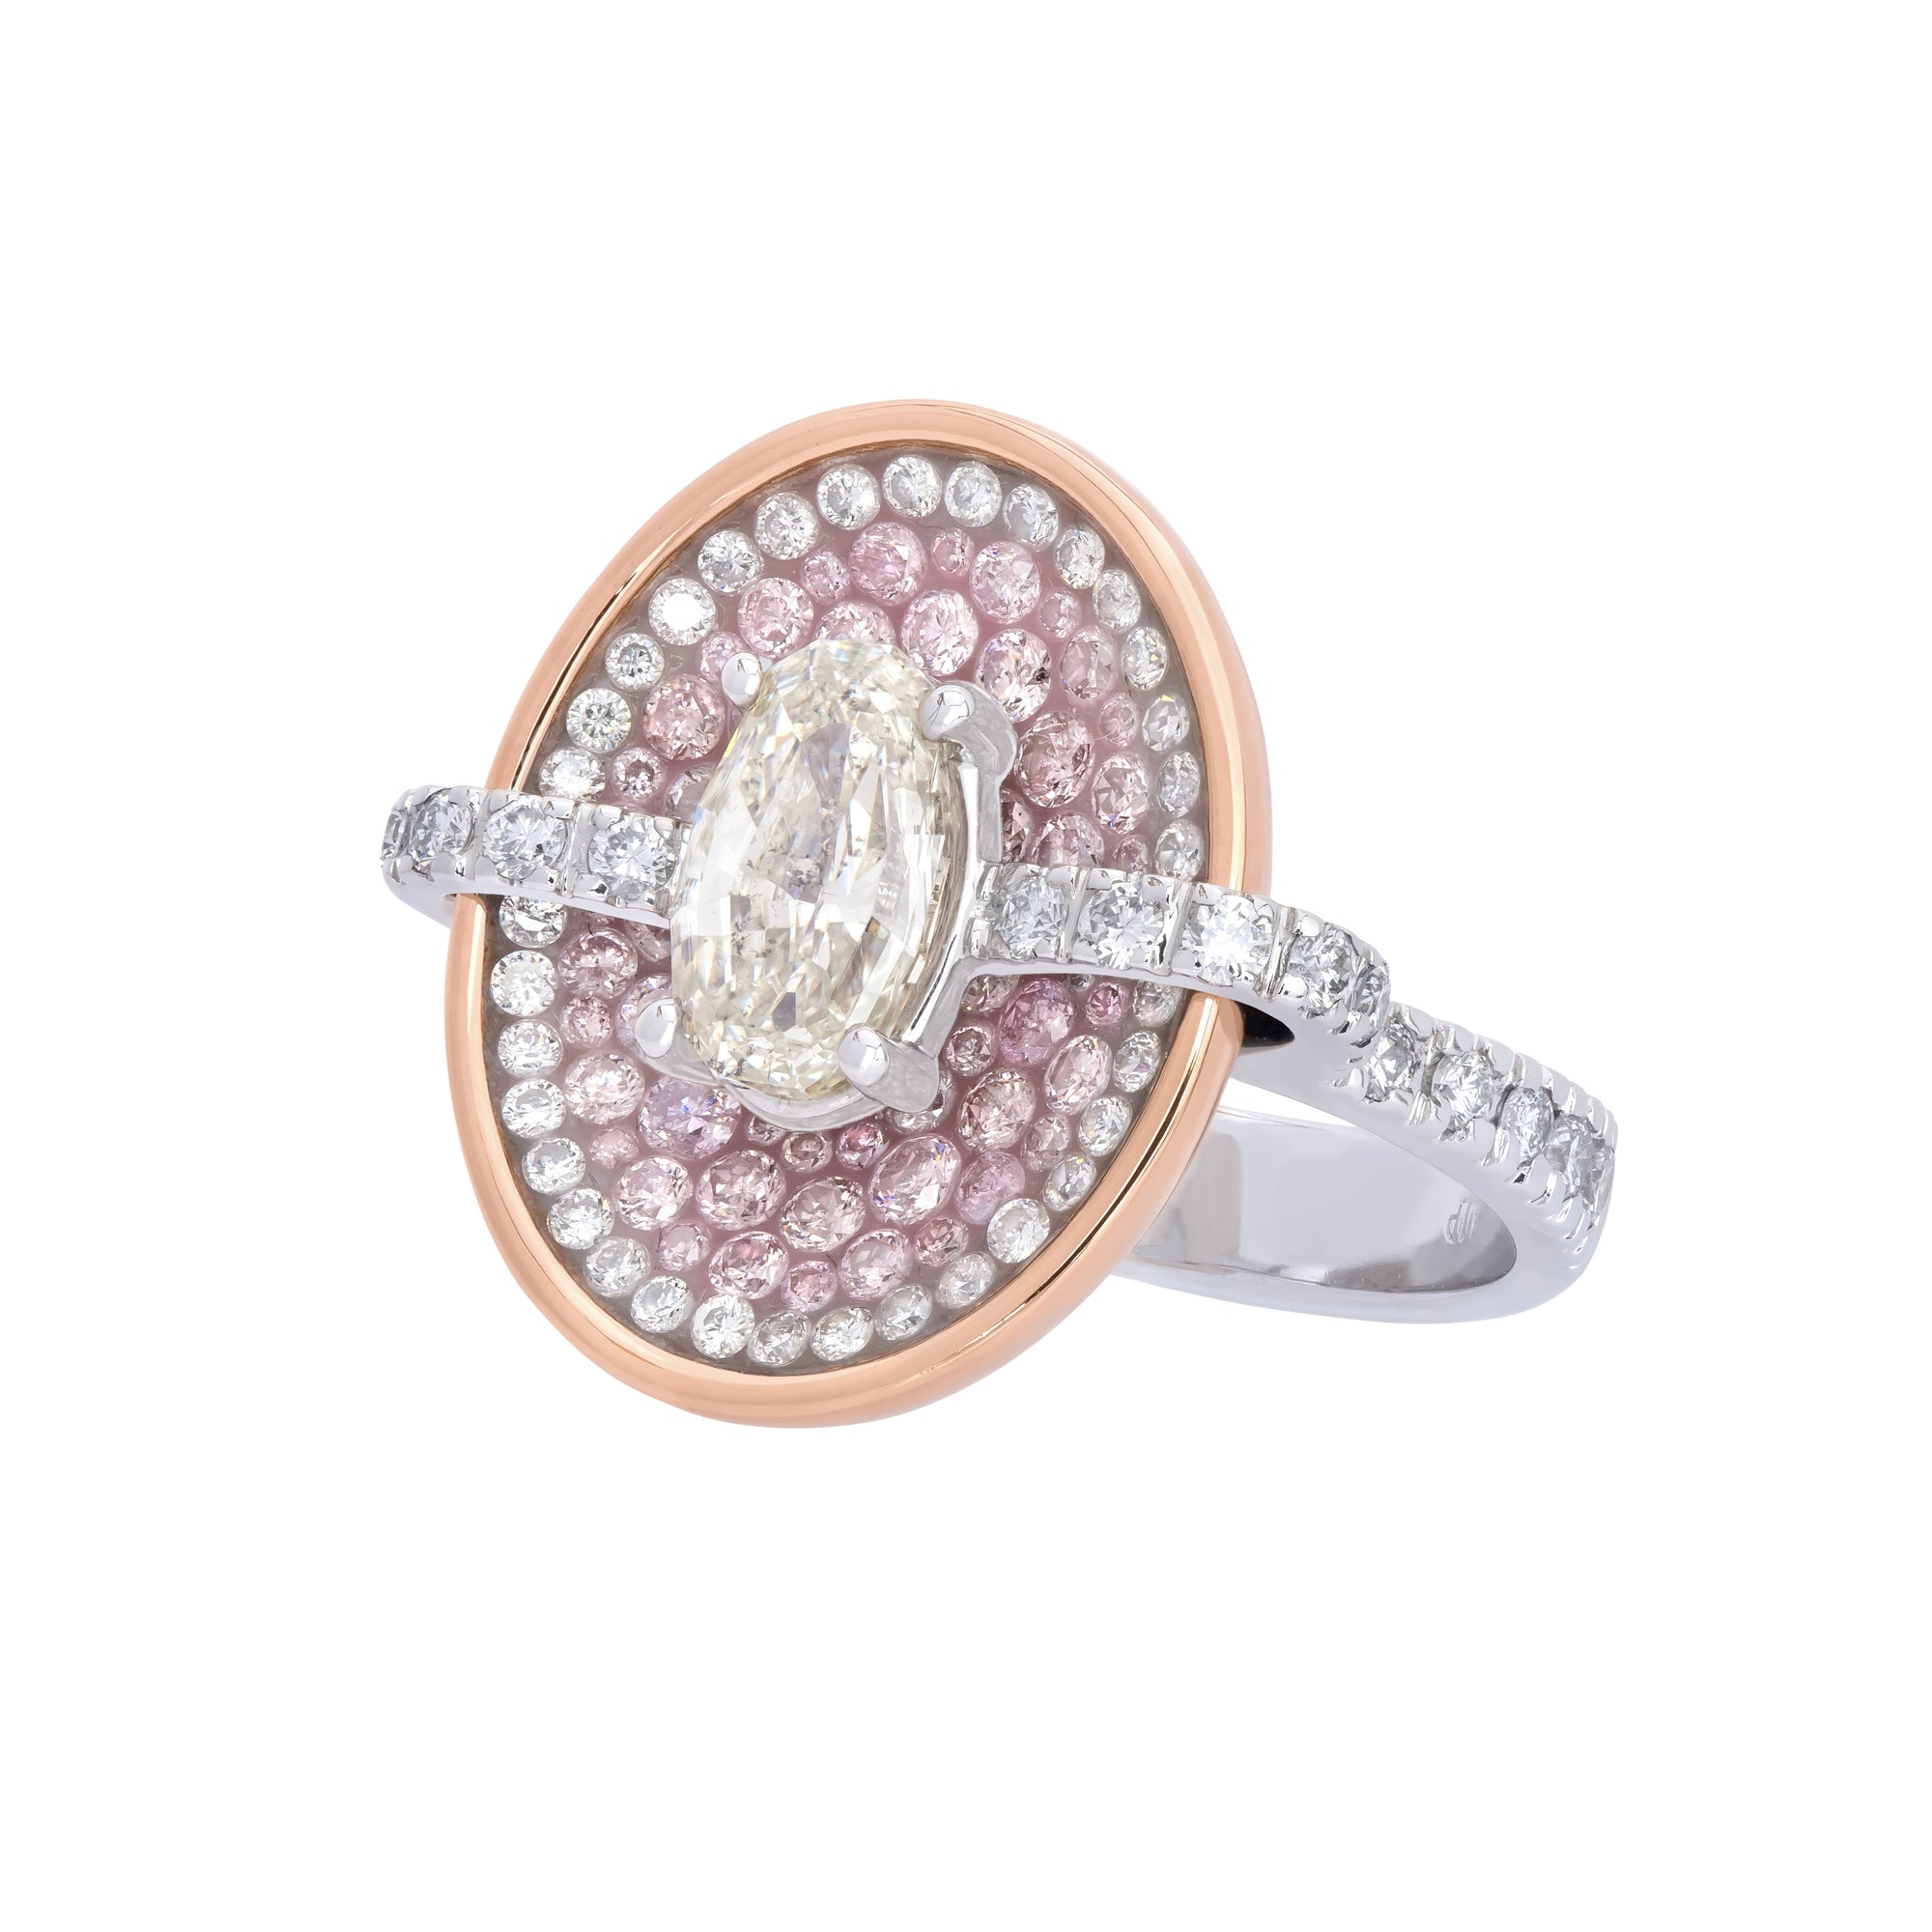 Pink & White Diamond Oval Opus Ring in 18k available at Talisman Collection Fine Jewelers in El Dorado Hills, CA and online. Specs: The Pink & White Diamond Oval Opus Ring features a stunning mosaic of white and natural pink diamonds, with an oval-cut diamond taking center stage. Exceptionally crafted in 18k rose and white gold, and a total diamond weight of 2.75 cts, this ring is nothing short of dazzling! How can you resist?